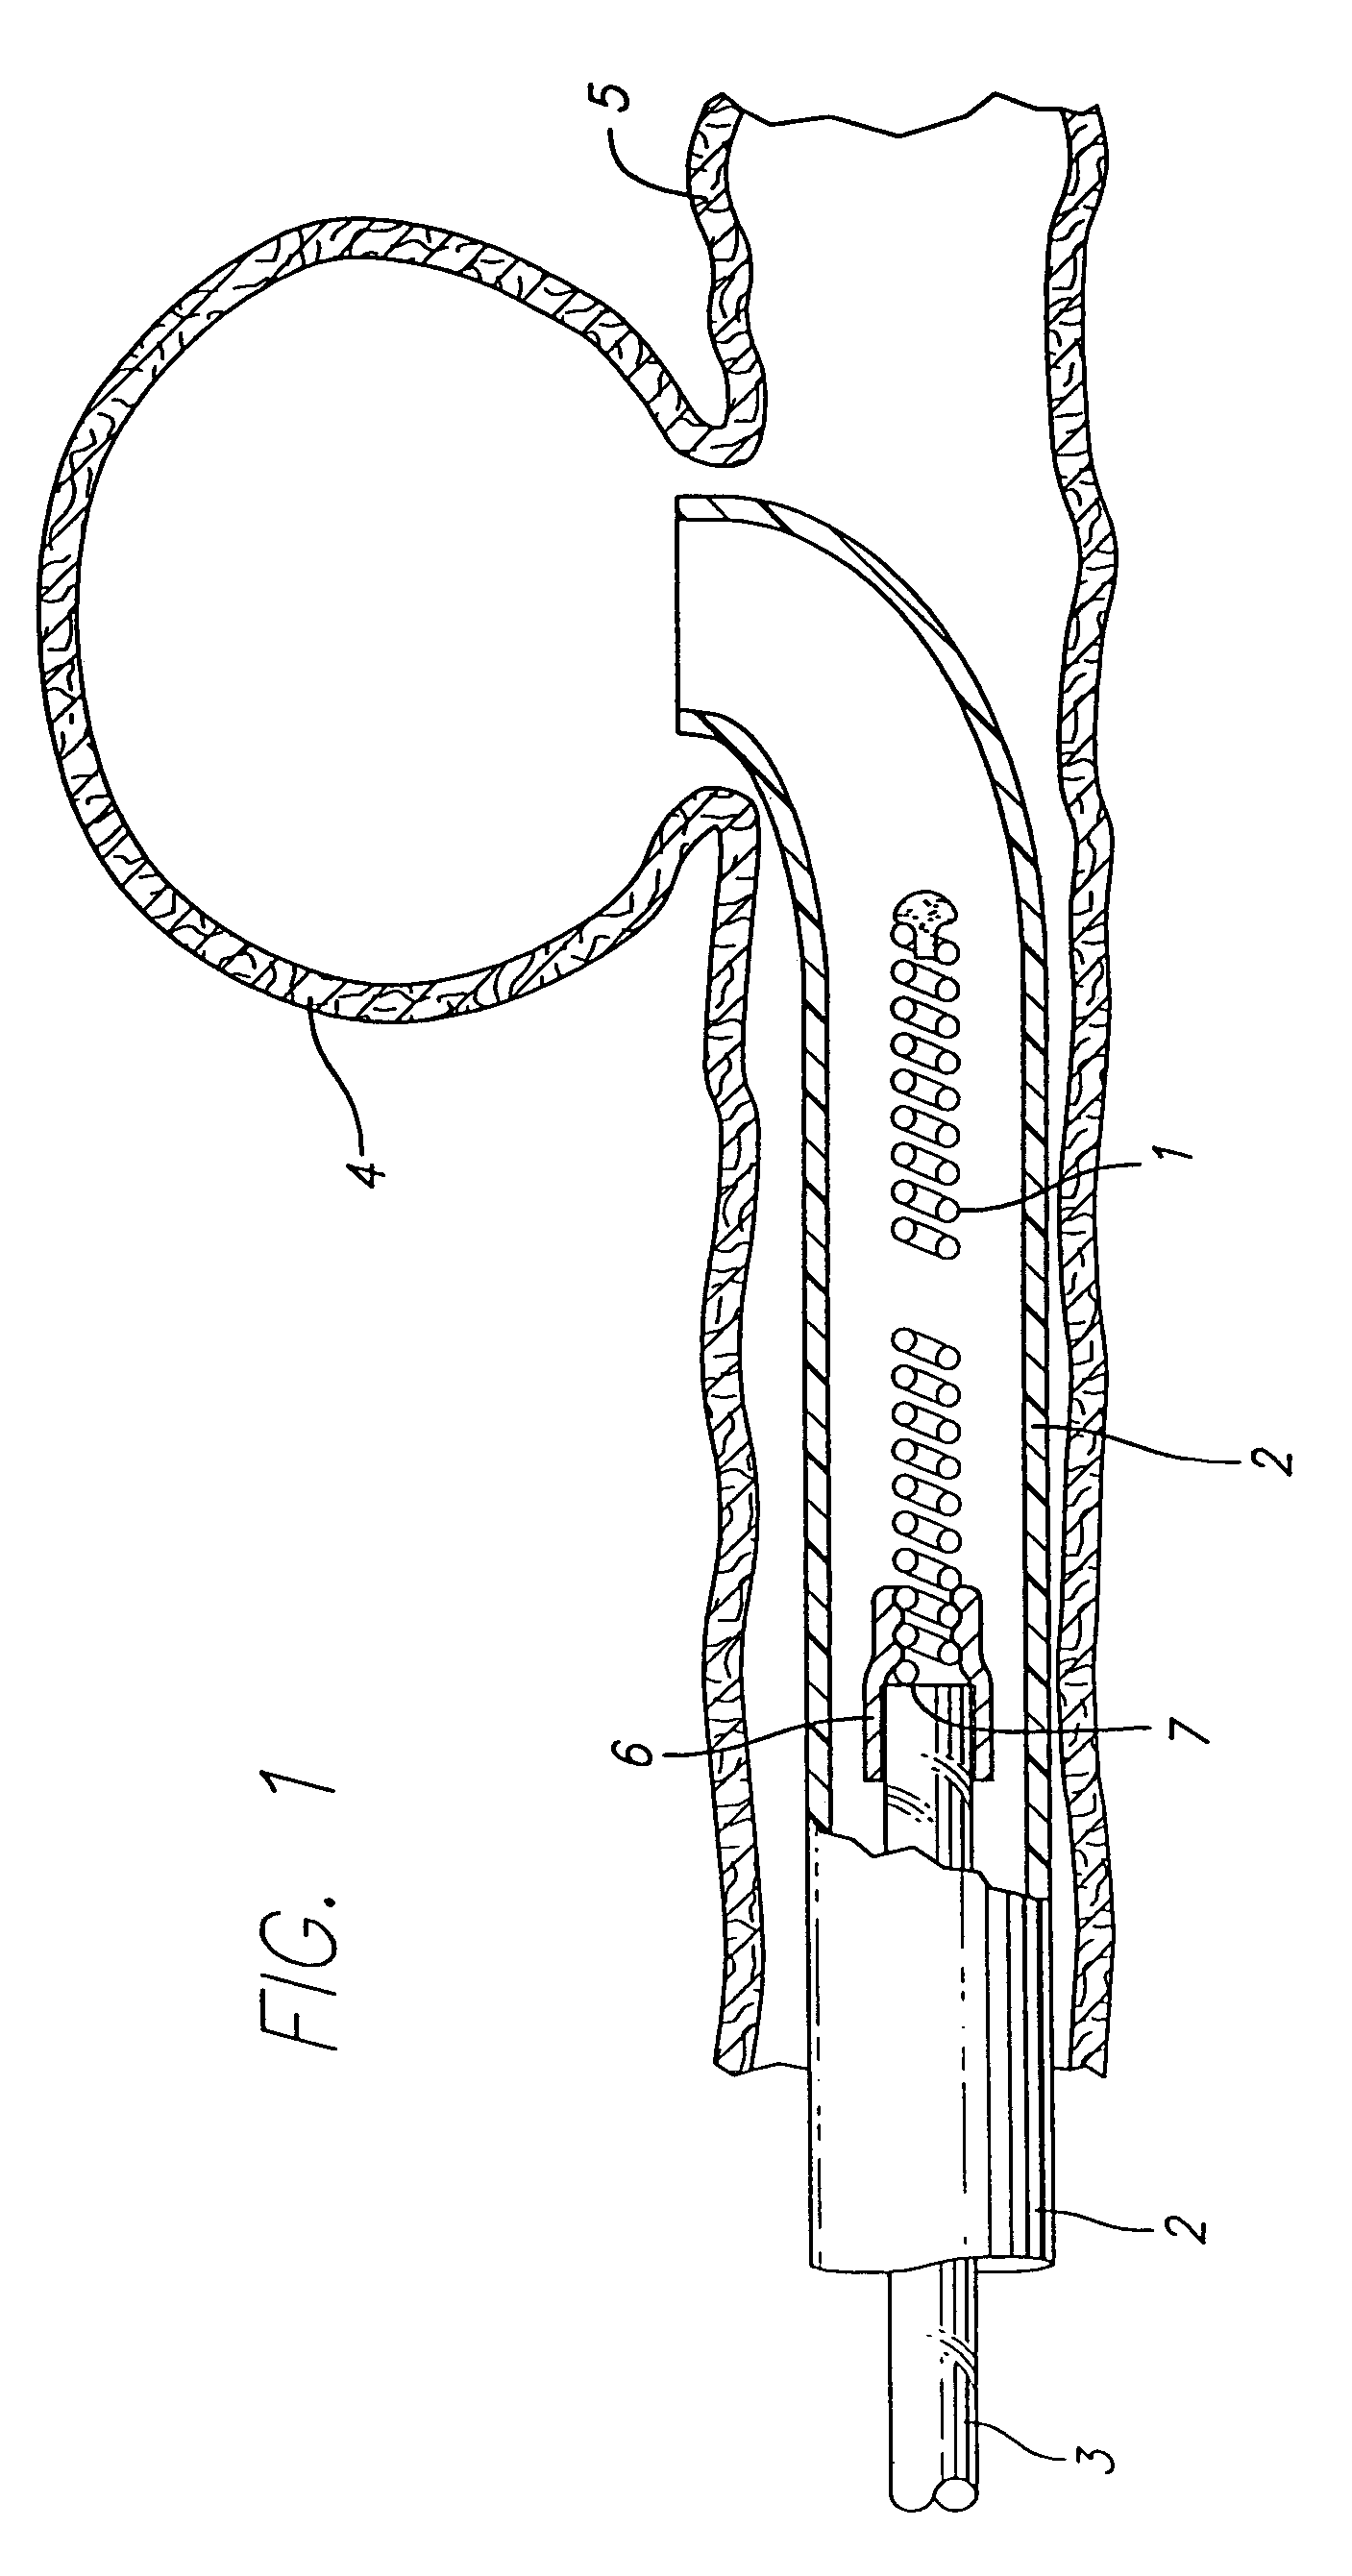 Three dimensional, low friction vasoocclusive coil, and method of manufacture